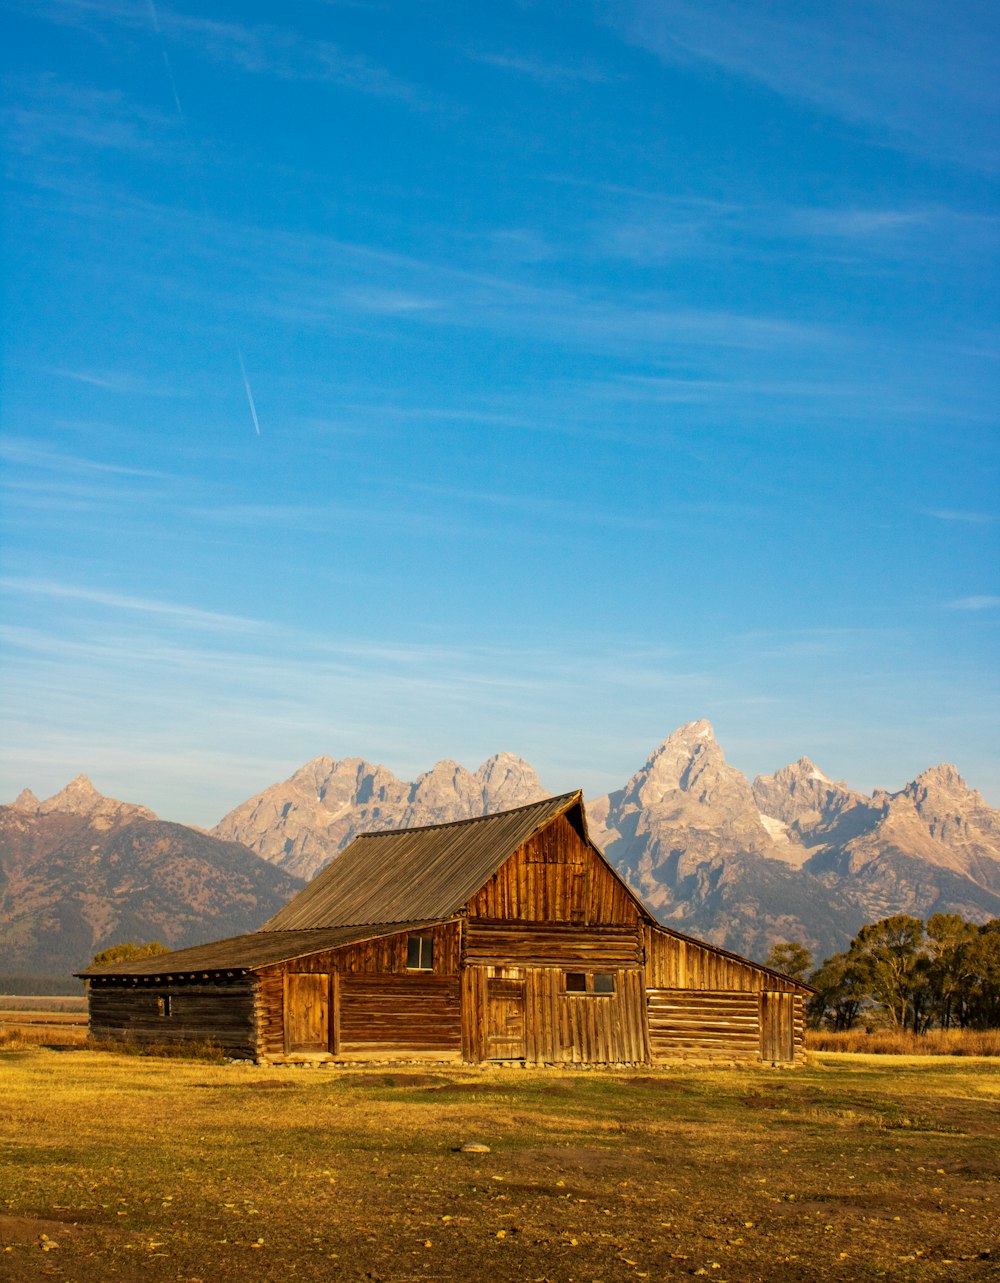 brown wooden house on brown grass field near mountain under blue sky during daytime